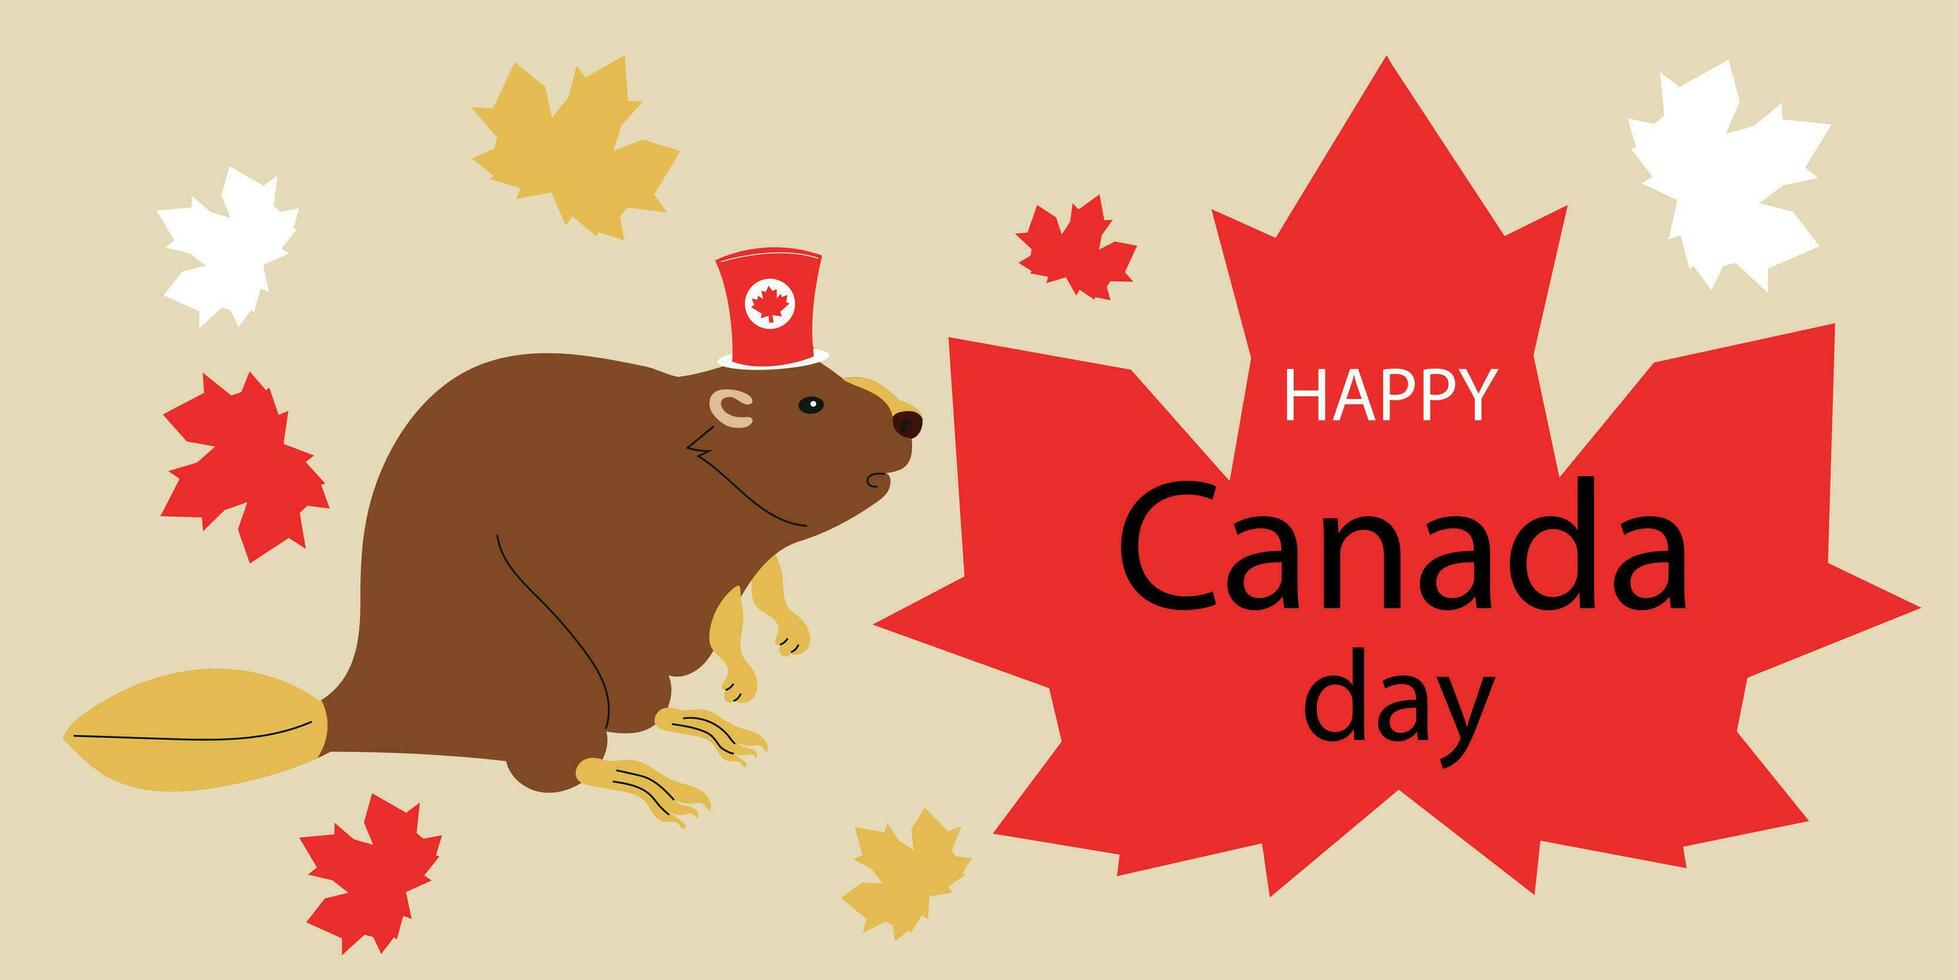 Happy Canada Day background. Red maple leaf and a beaver in a hat. Vector illustration. Celebrating Canada Day on July 1st. Banner, poster, postcard.